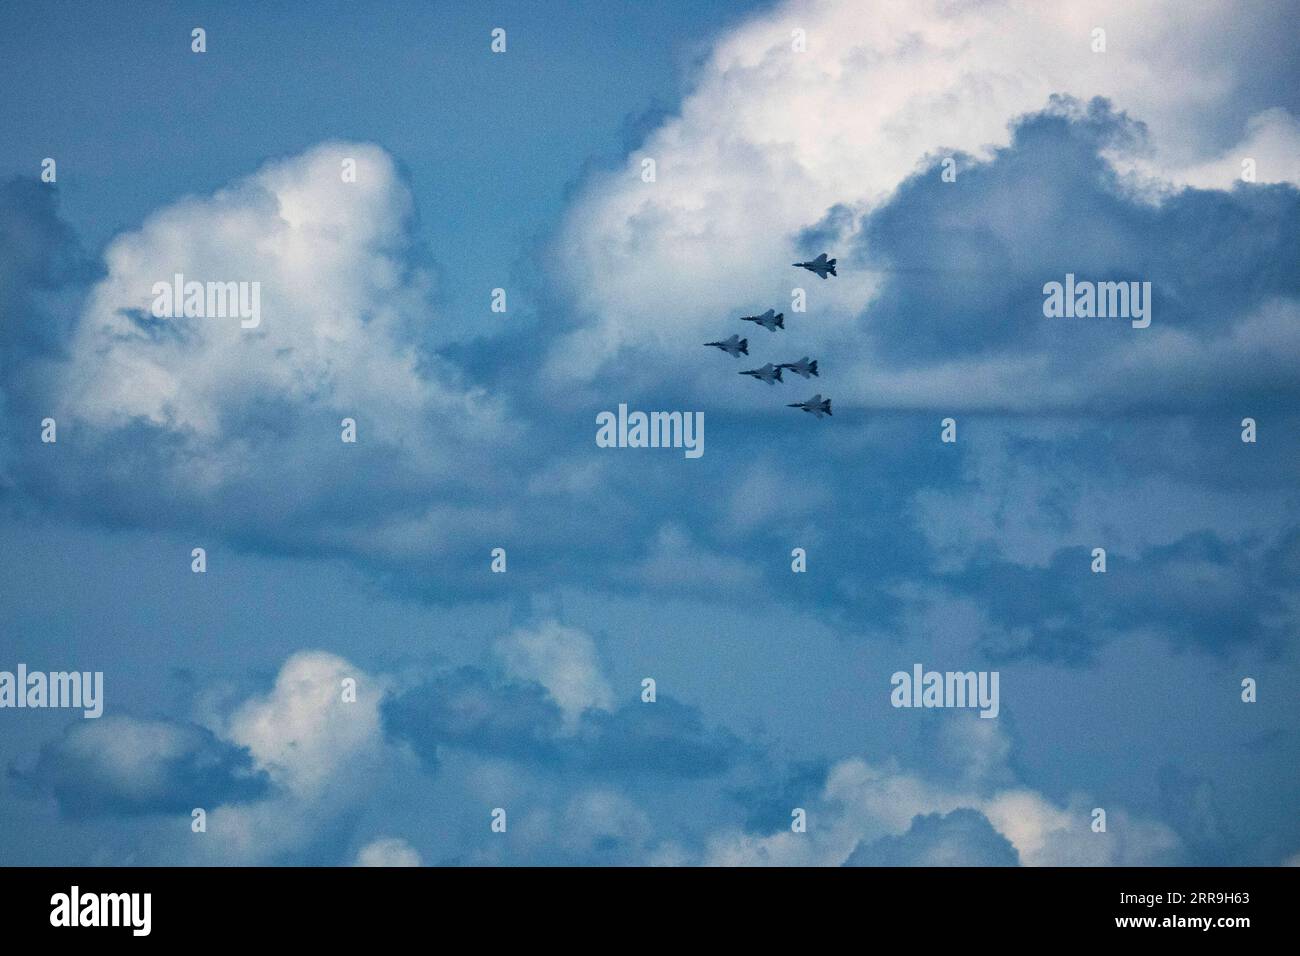 210617 -- SINGAPORE, June 17, 2021 -- Aircrafts fly in formation as part of the rehearsal for the upcoming National Day Parade flying display in Singapore on June 17, 2021. Singapore celebrates its independence day every year on Aug. 9. Photo by /Xinhua SINGAPORE-NATIONAL DAY PARADE-REHEARSAL ThenxChihxWey PUBLICATIONxNOTxINxCHN Stock Photo